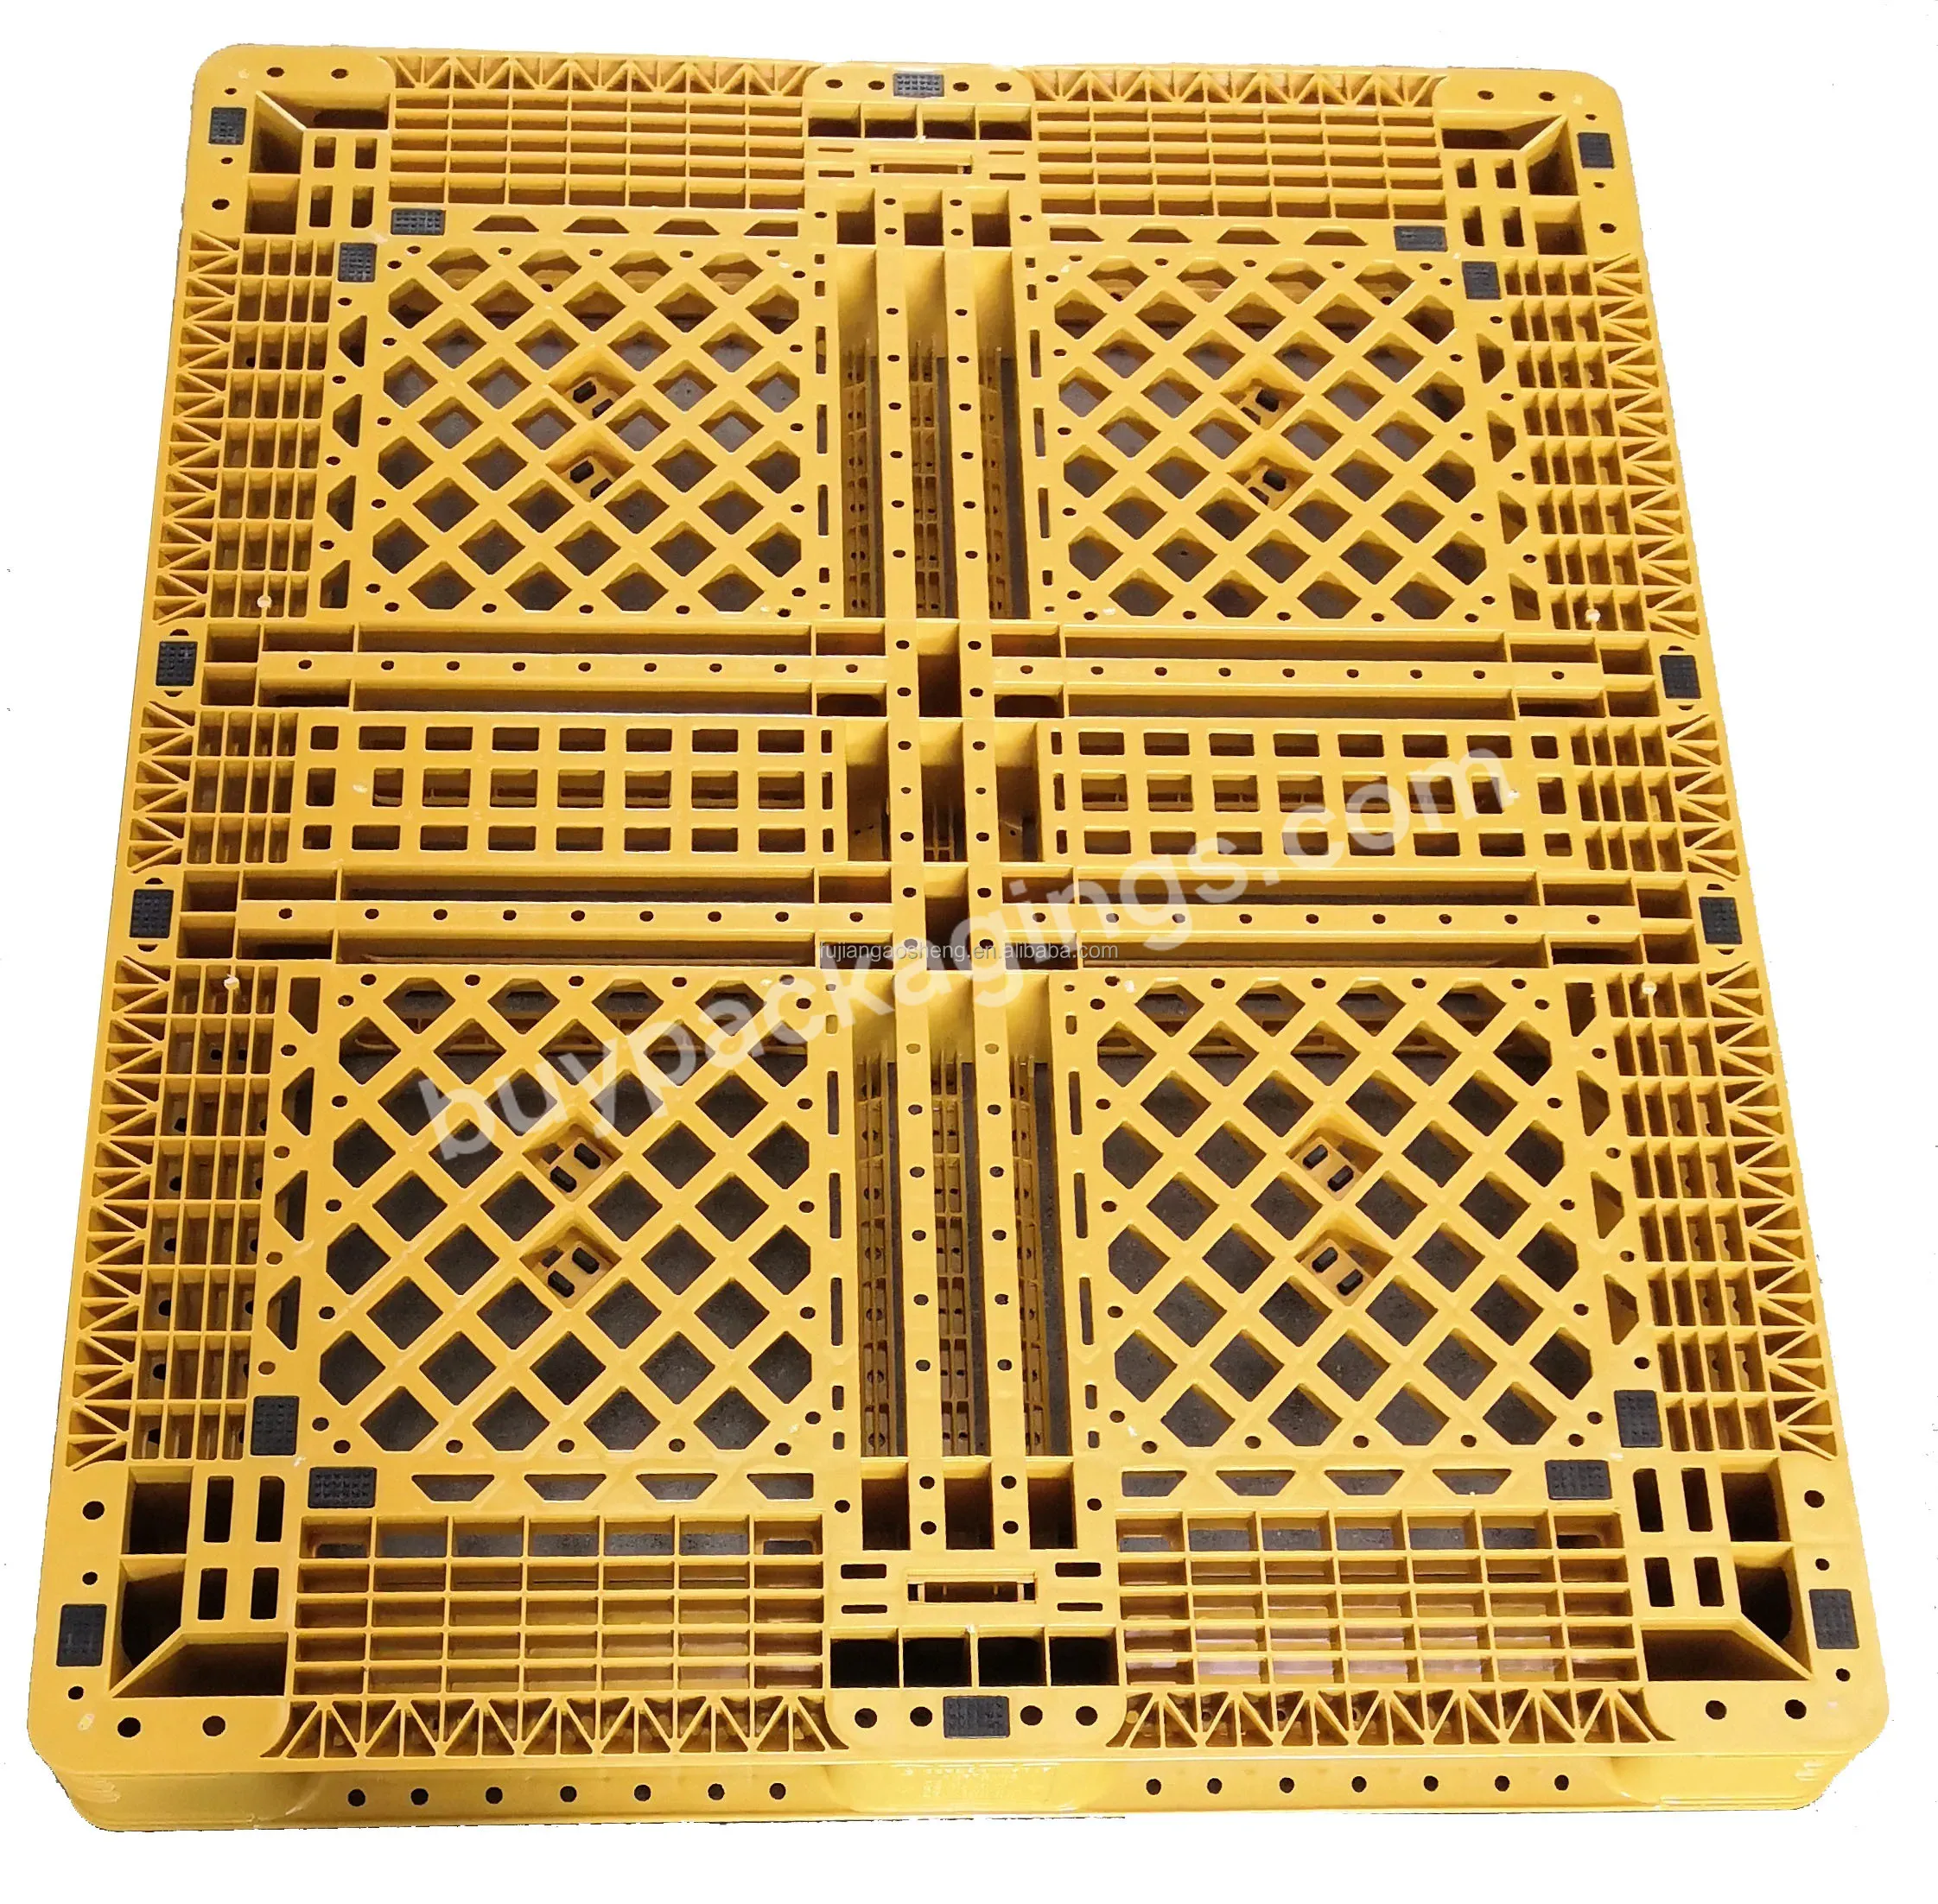 Pallet Cheap Price Shipping Storage Heavy Duty Euro Hdpe Large Stackable Reversible Plastic Gaosheng Single Faced Cn;fuj 1210y - Buy Plastic Pallet,Pallet For Sale,Pallet.